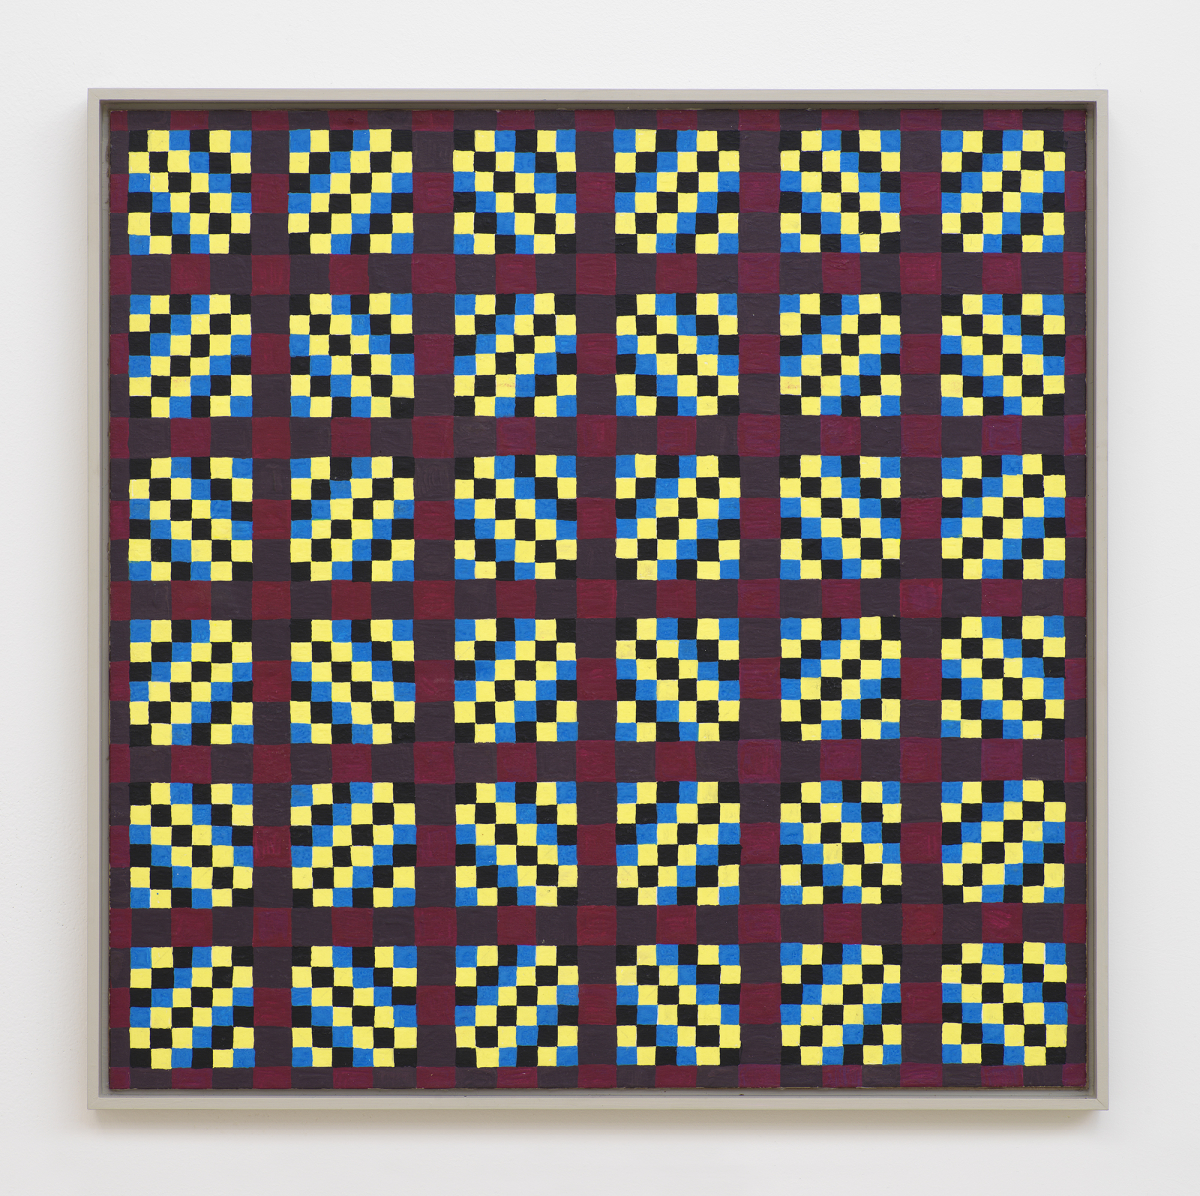 On a white wall a square painting depicting a grid of crisscrossing lines generating many rectangles, and triangles. The dominant colors are hues of maroon, black, blue, and yellow. The frame is painted gray. 
